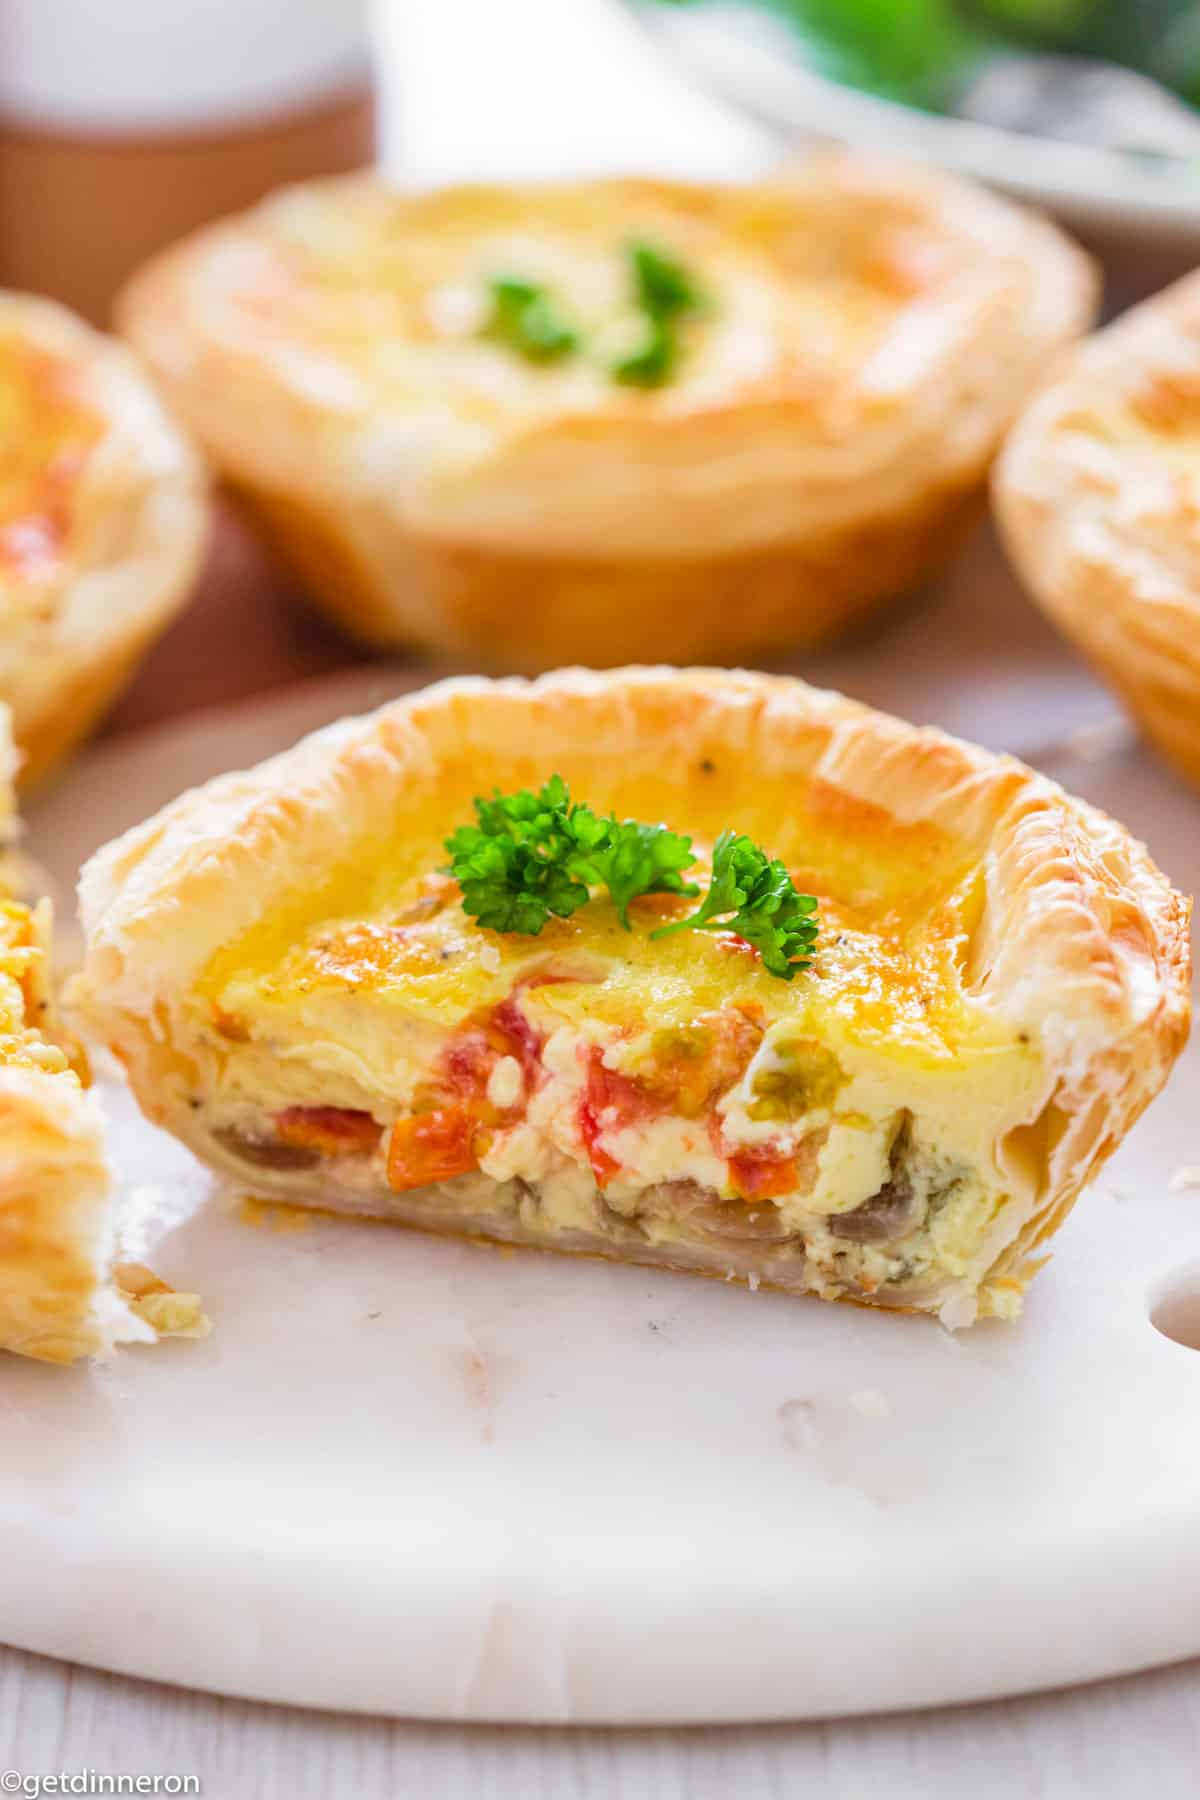 One quiche sliced in half to show filling while sitting on marble white platter.